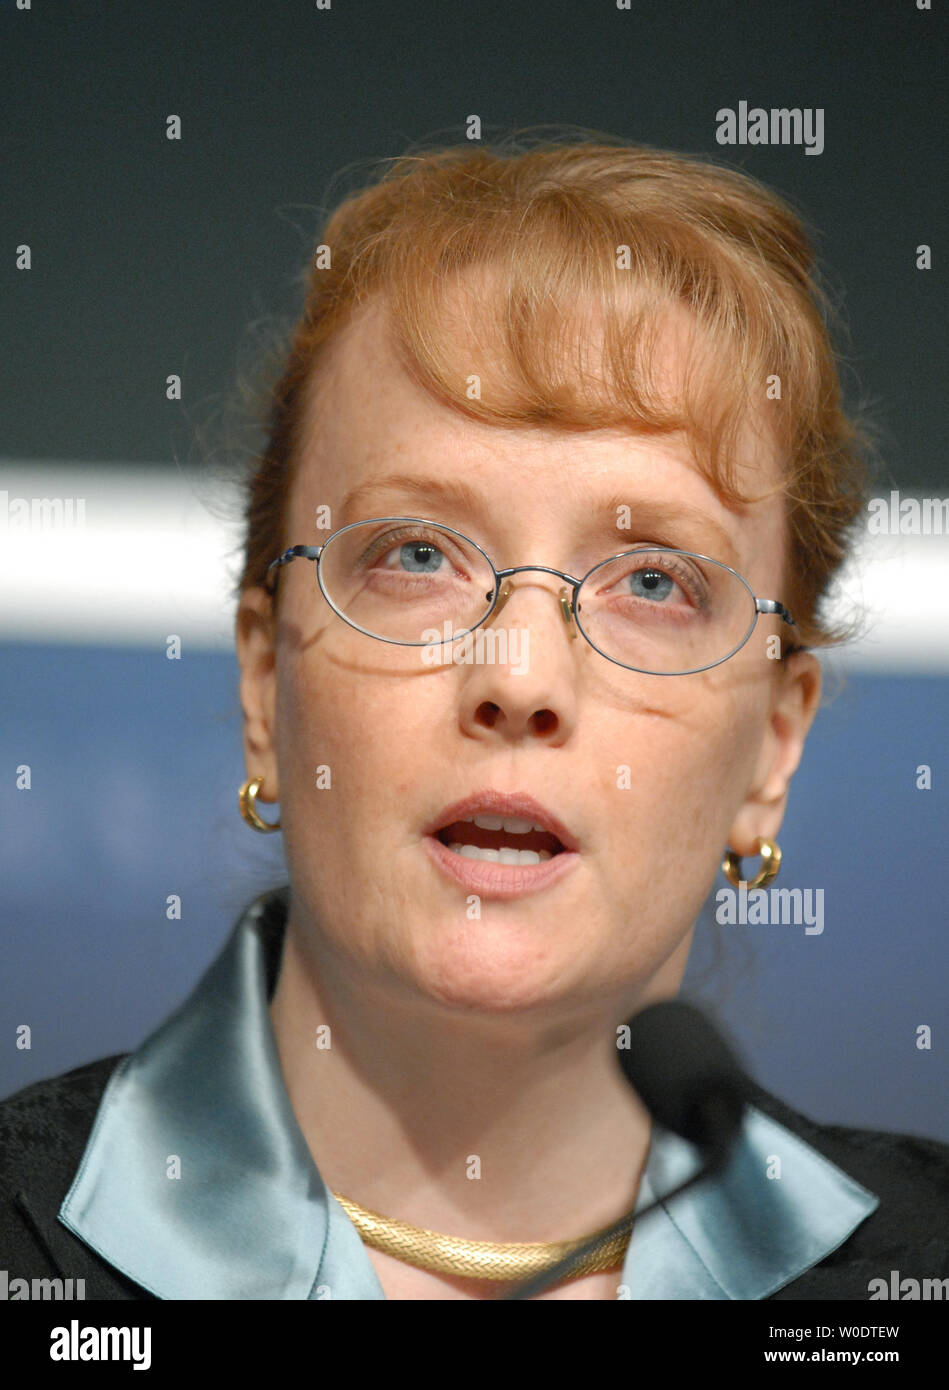 Deputy NASA Administrator Shana Dale speaks at a press conference after a report released said NASA allowed astronauts to fly drunk on at least two known occasions, in Washington on July 27, 2007. (UPI Photo/Alexis C. Glenn) Stock Photo